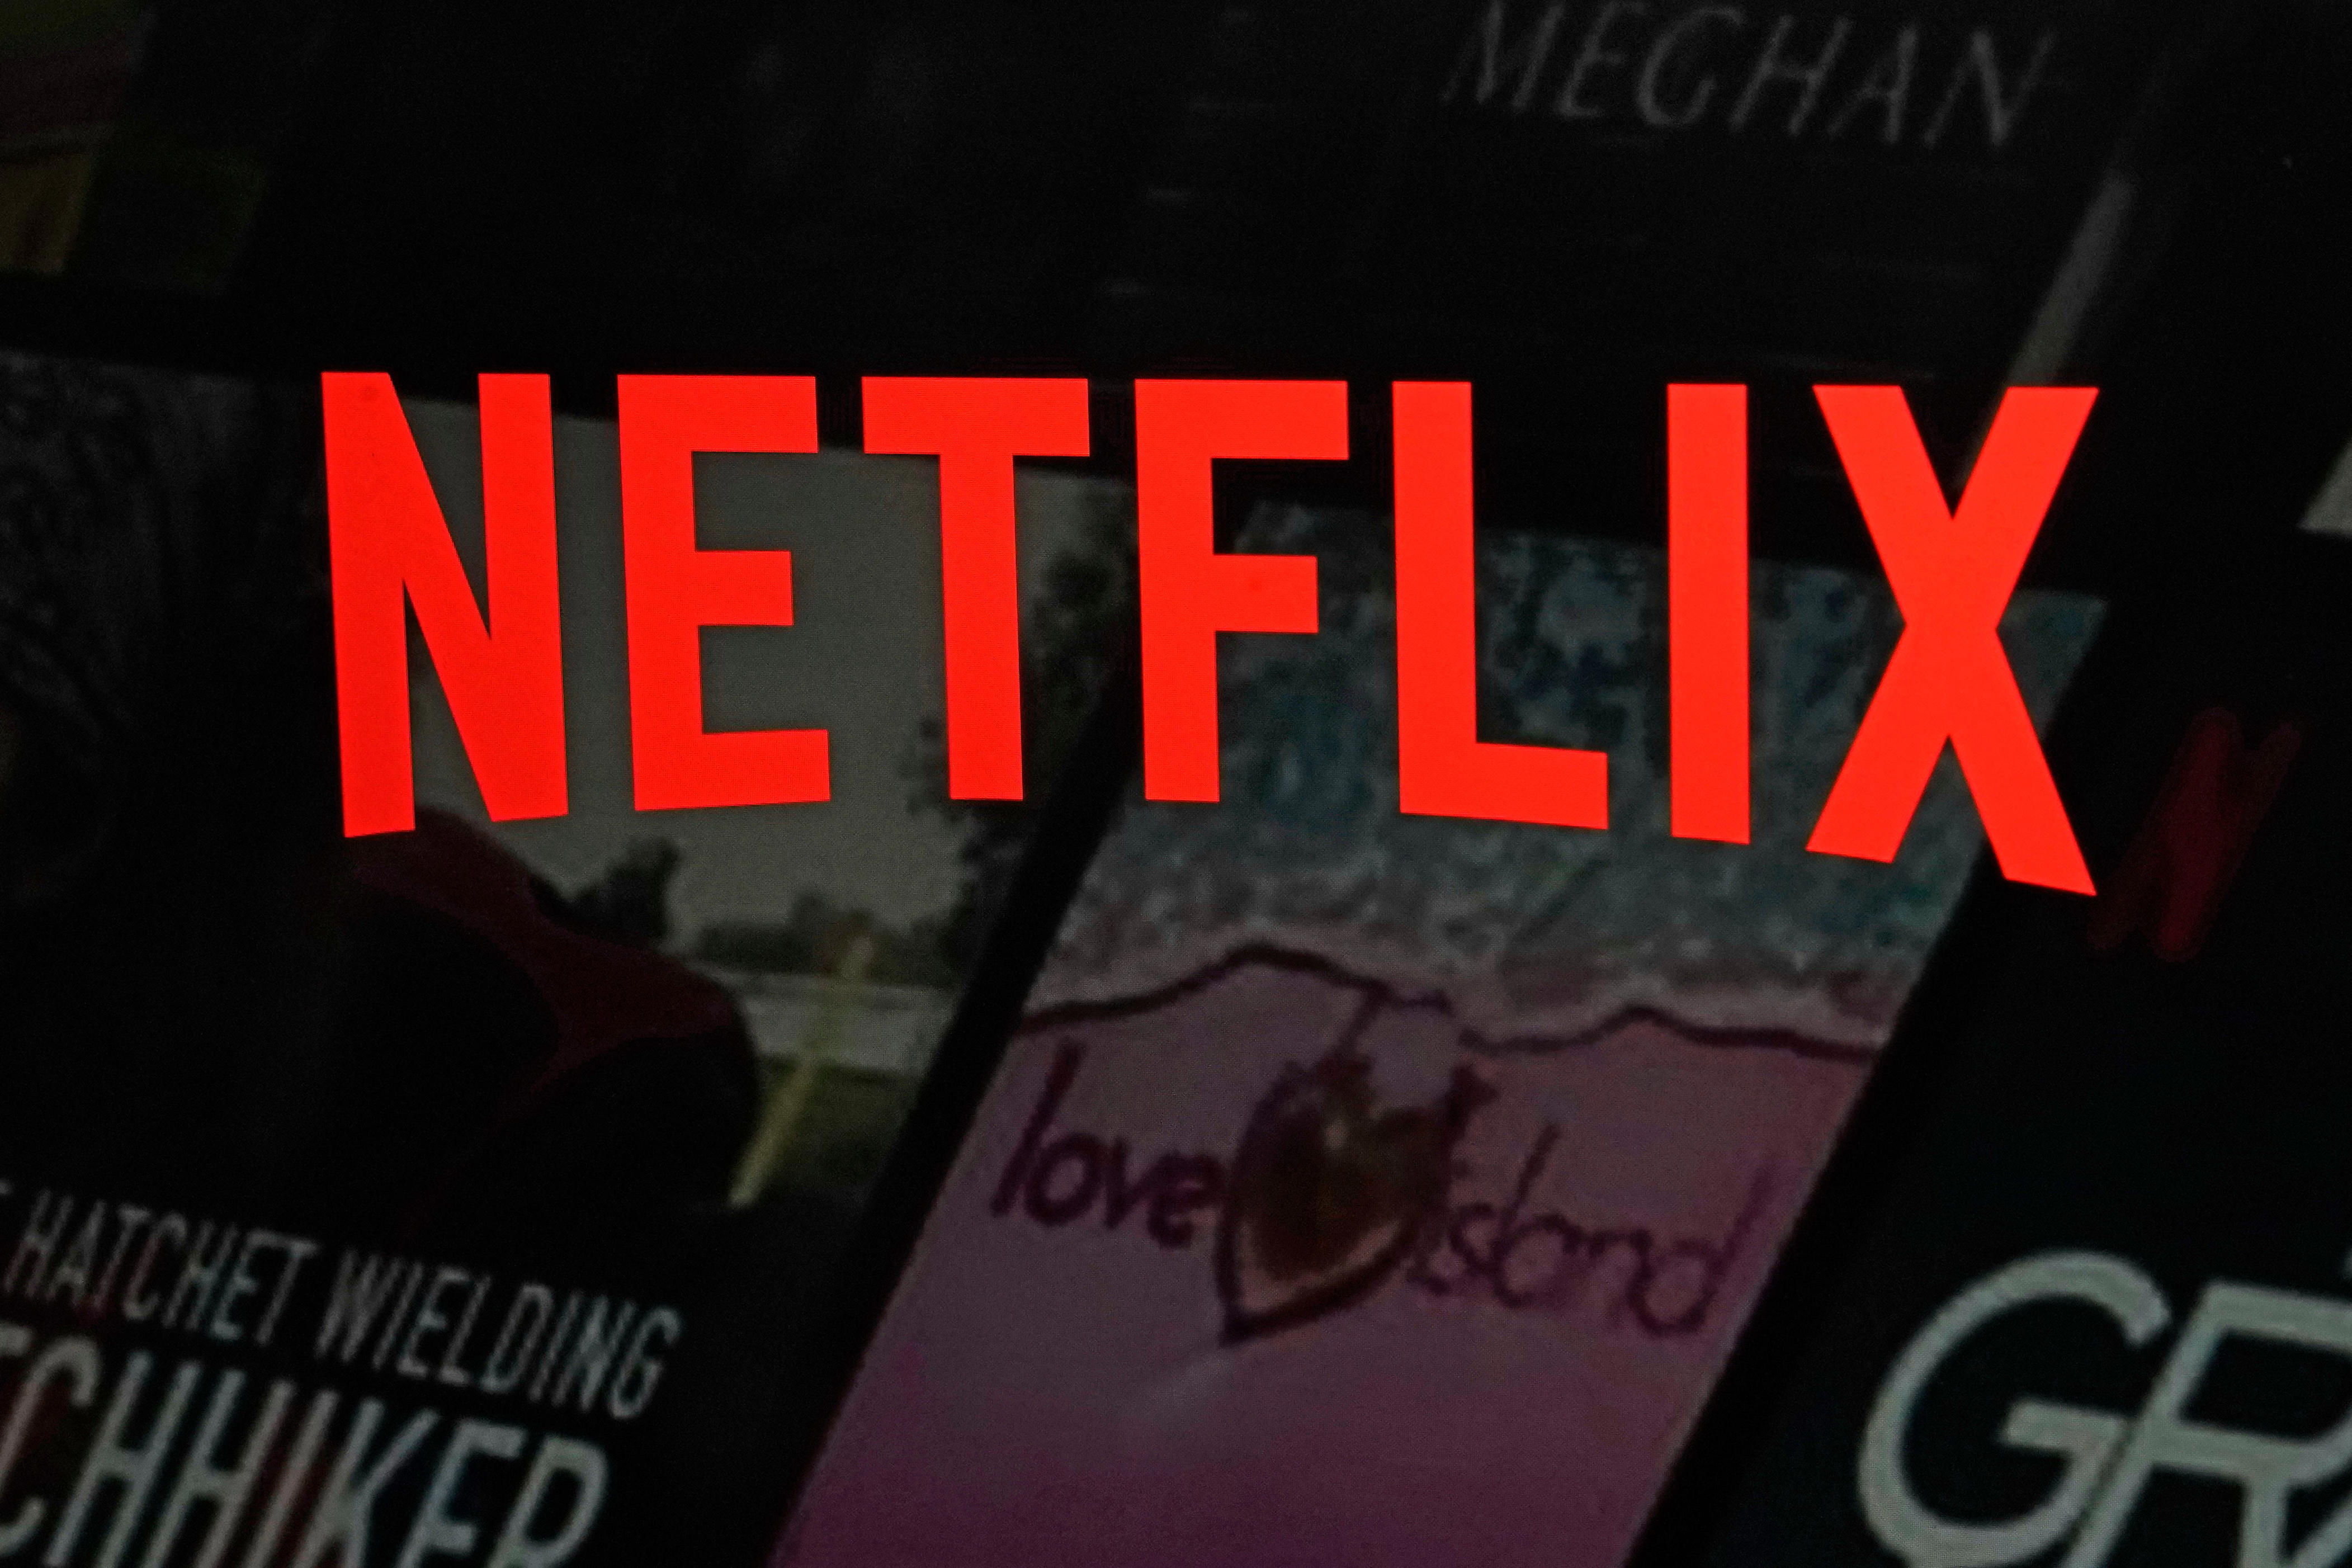 netflix sends warning to apple pay users: update payment method or lose account access